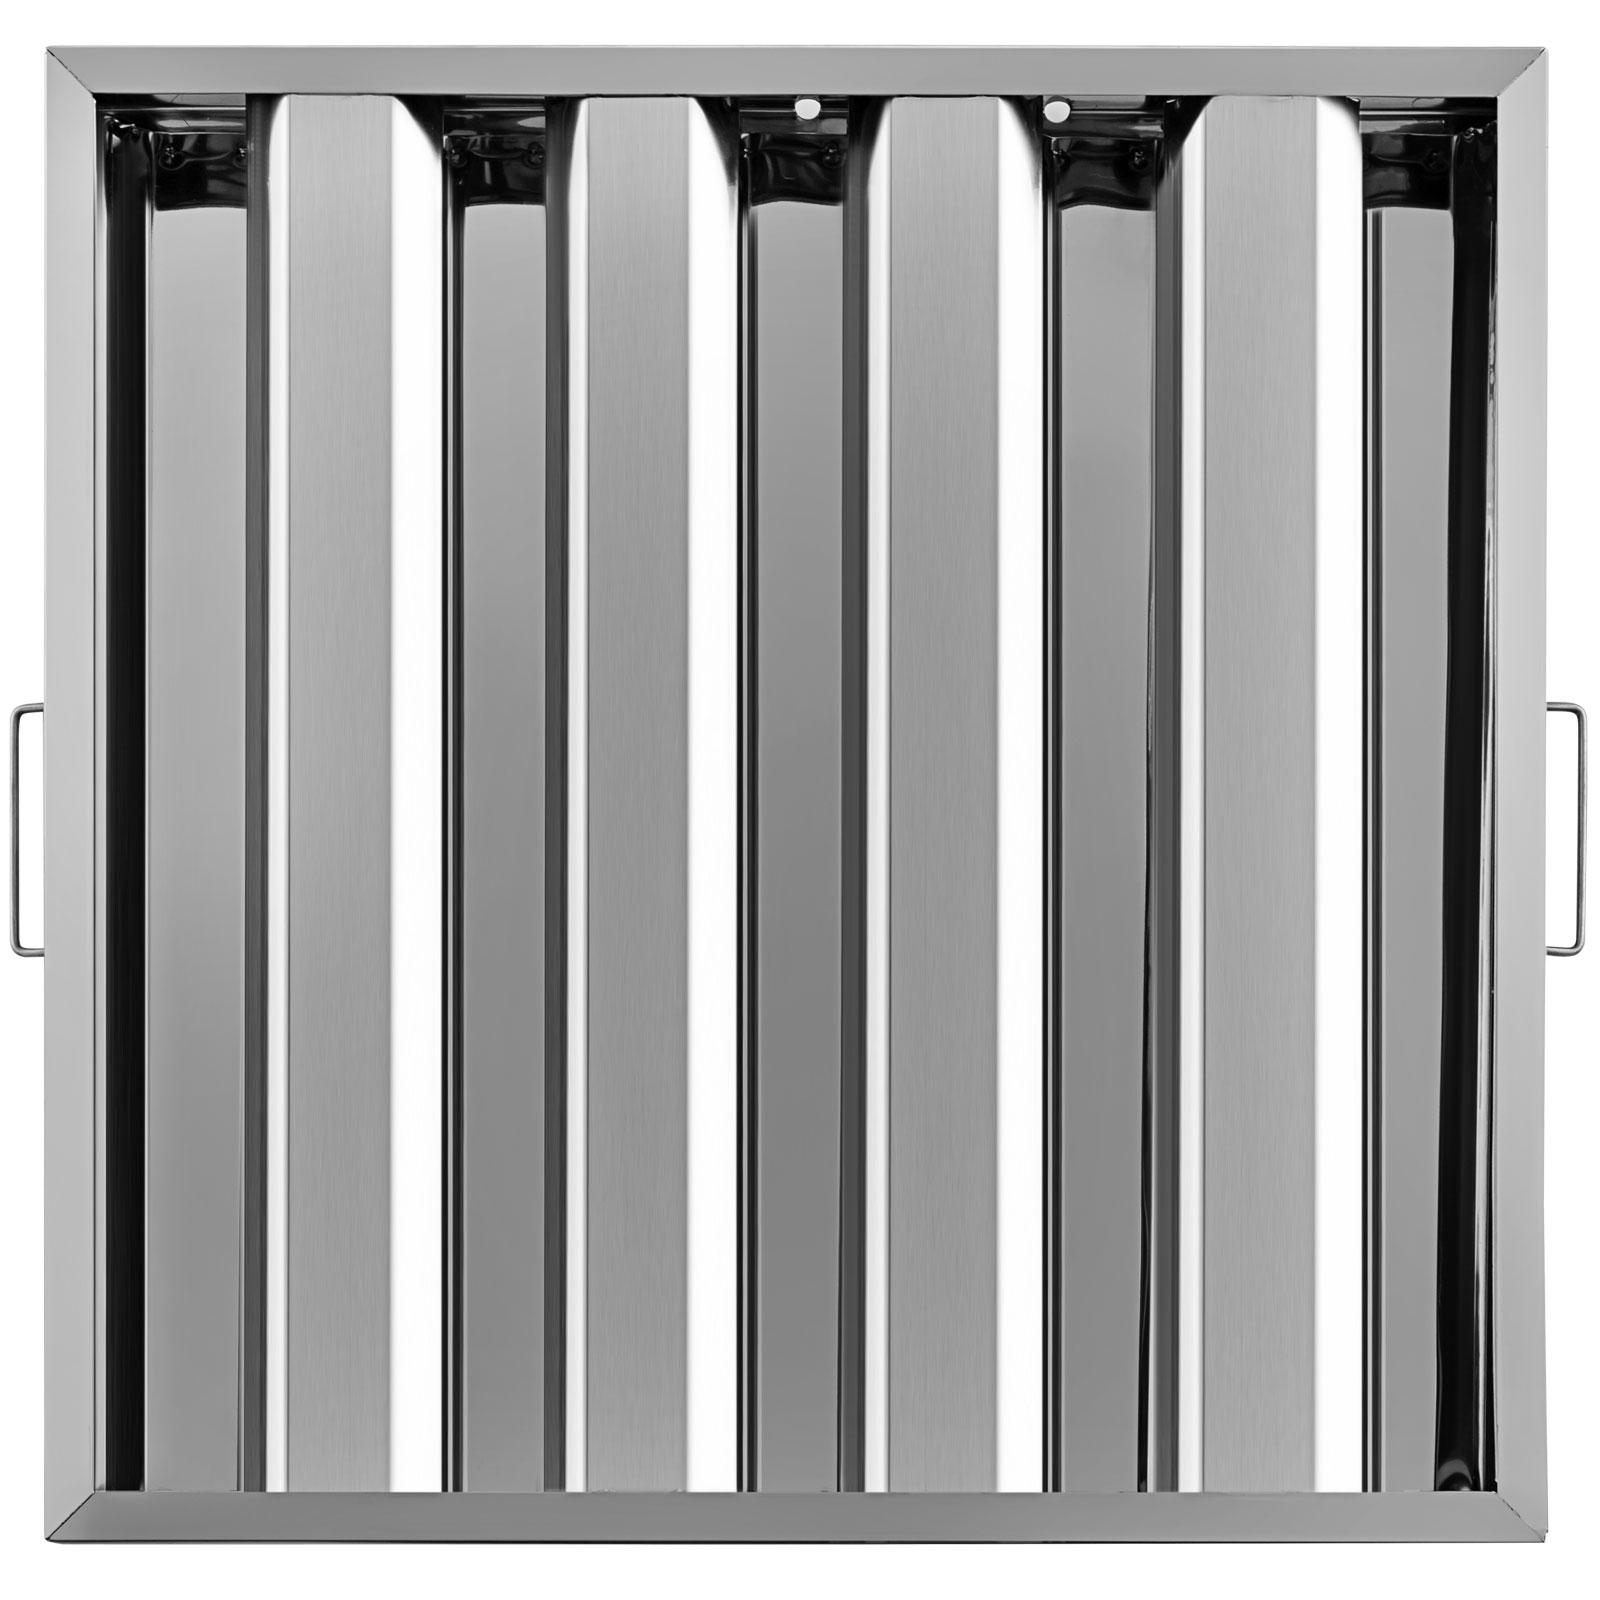 VEVOR 6 Packs Hood Filters 19.5 in. W x 19.5 in. H 430 Stainless Steel  Commercial Hood Filters with 4 Slots Range Hood Filter YSFLQ6PCS4C20X20YV0  - The Home Depot